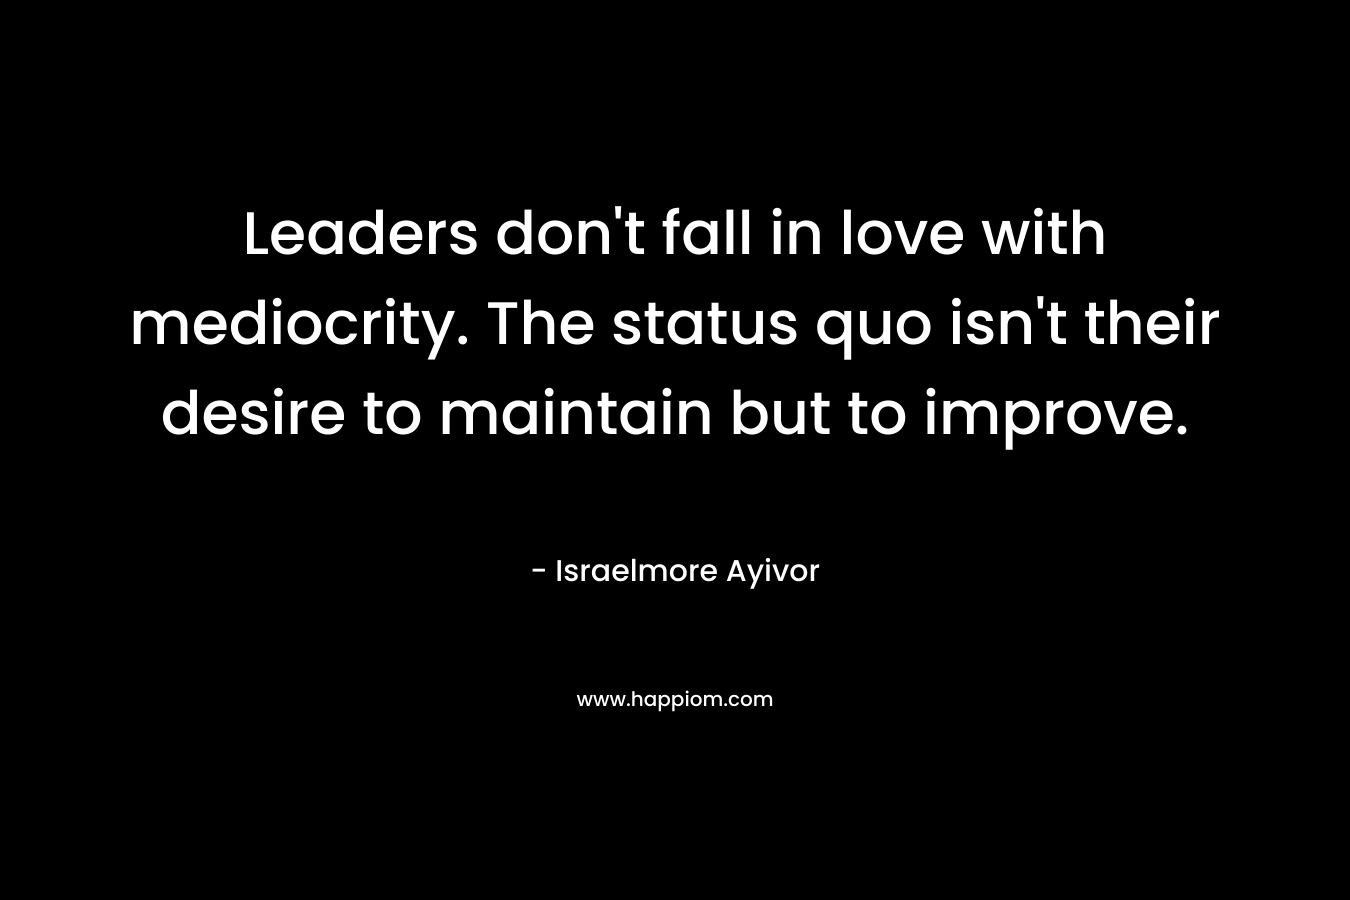 Leaders don't fall in love with mediocrity. The status quo isn't their desire to maintain but to improve.